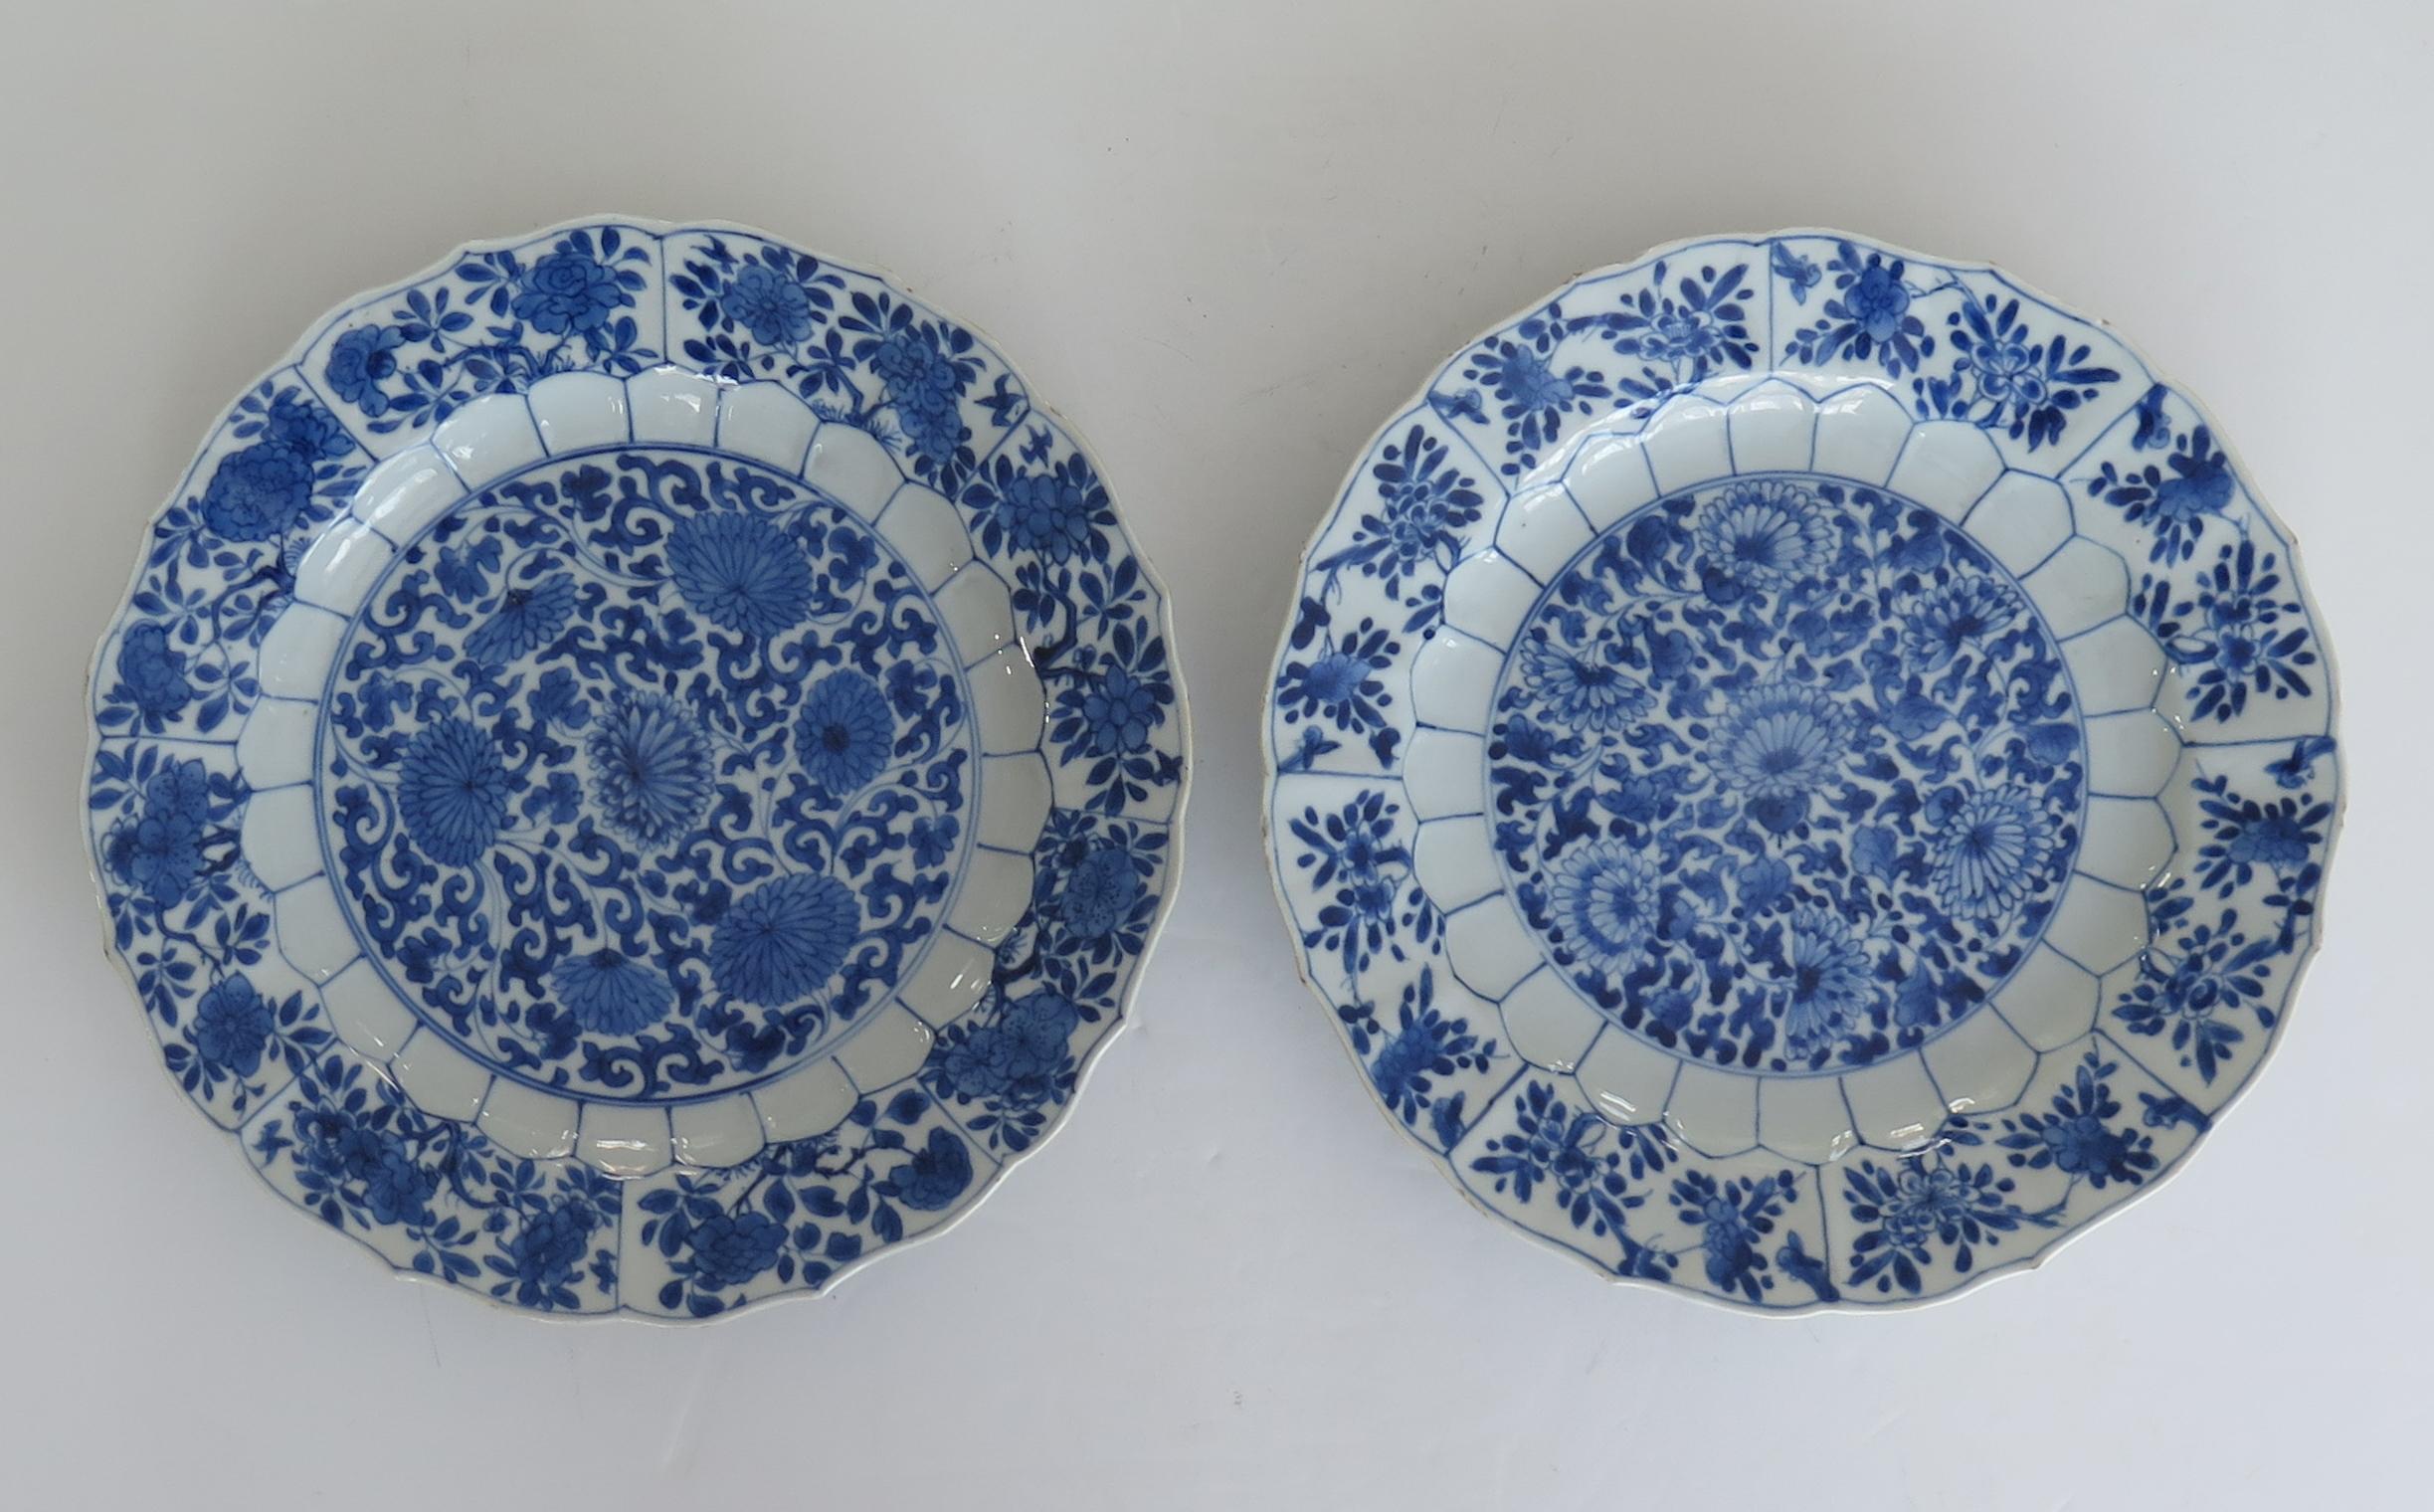 These are a very beautiful pair of hand painted blue and white Chinese porcelain deep plates or dishes, dating to the second half of the 17th century, circa 1675, Qing dynasty, the early part of reign of Kangxi ( 1662 to 1722) period.

The plates